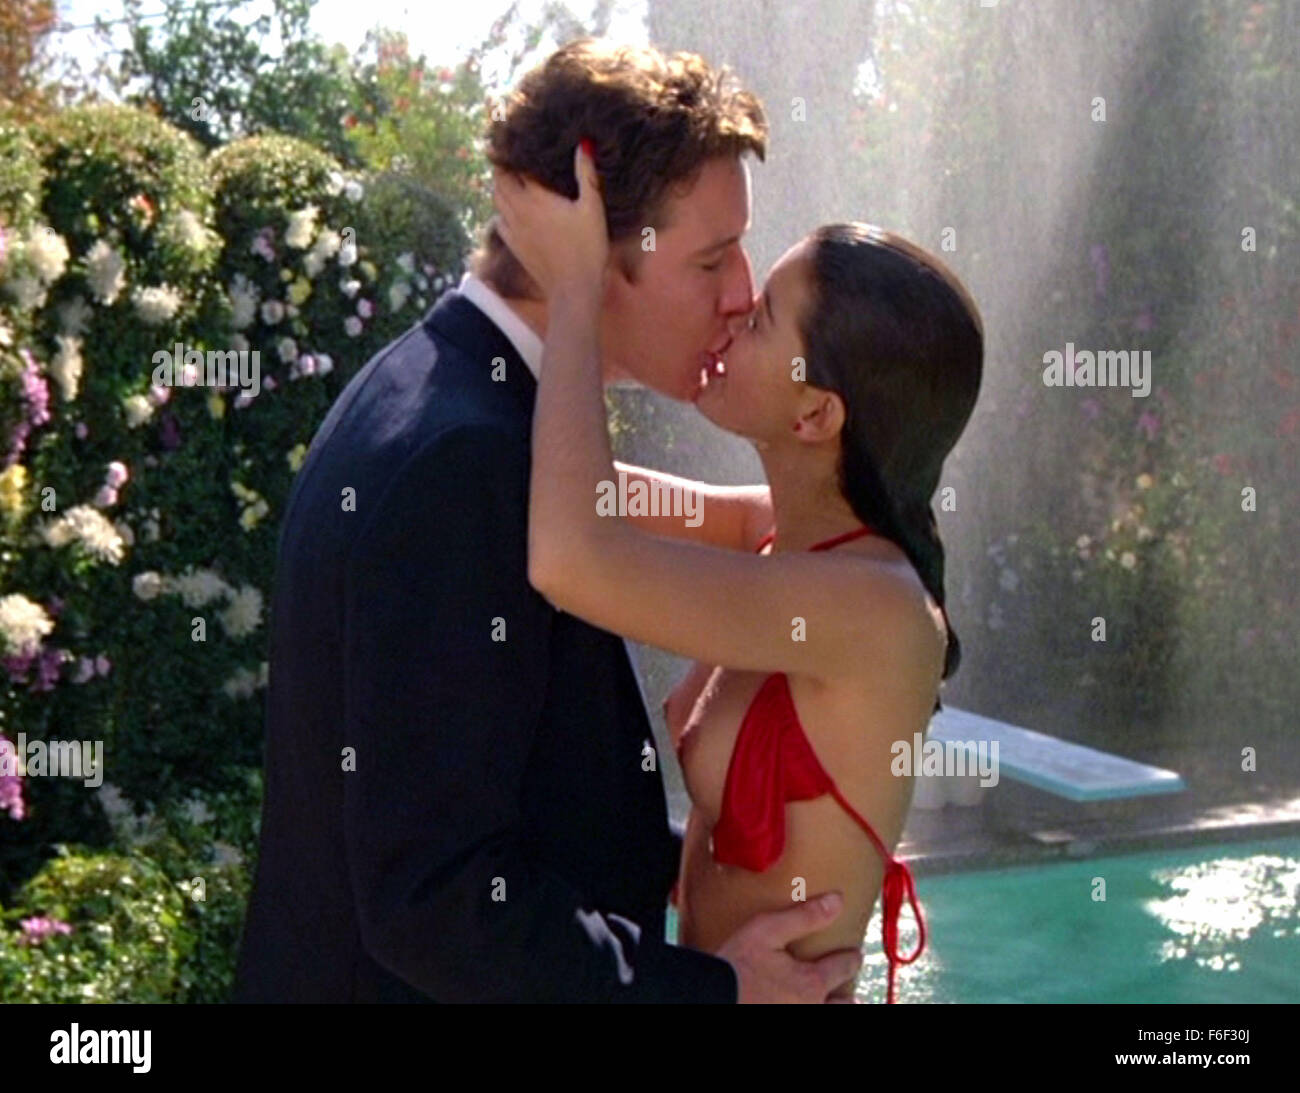 Aug 13, 1982; Los Angeles, CA, USA; Actress PHOEBE CATES stars as Linda Barrett and JUDGE REINHOLD as Brad Hamilton in the Universal Pictures comedy classic, 'Fast Times at Ridgemont High.' Directed by Amy Heckerling. Stock Photo